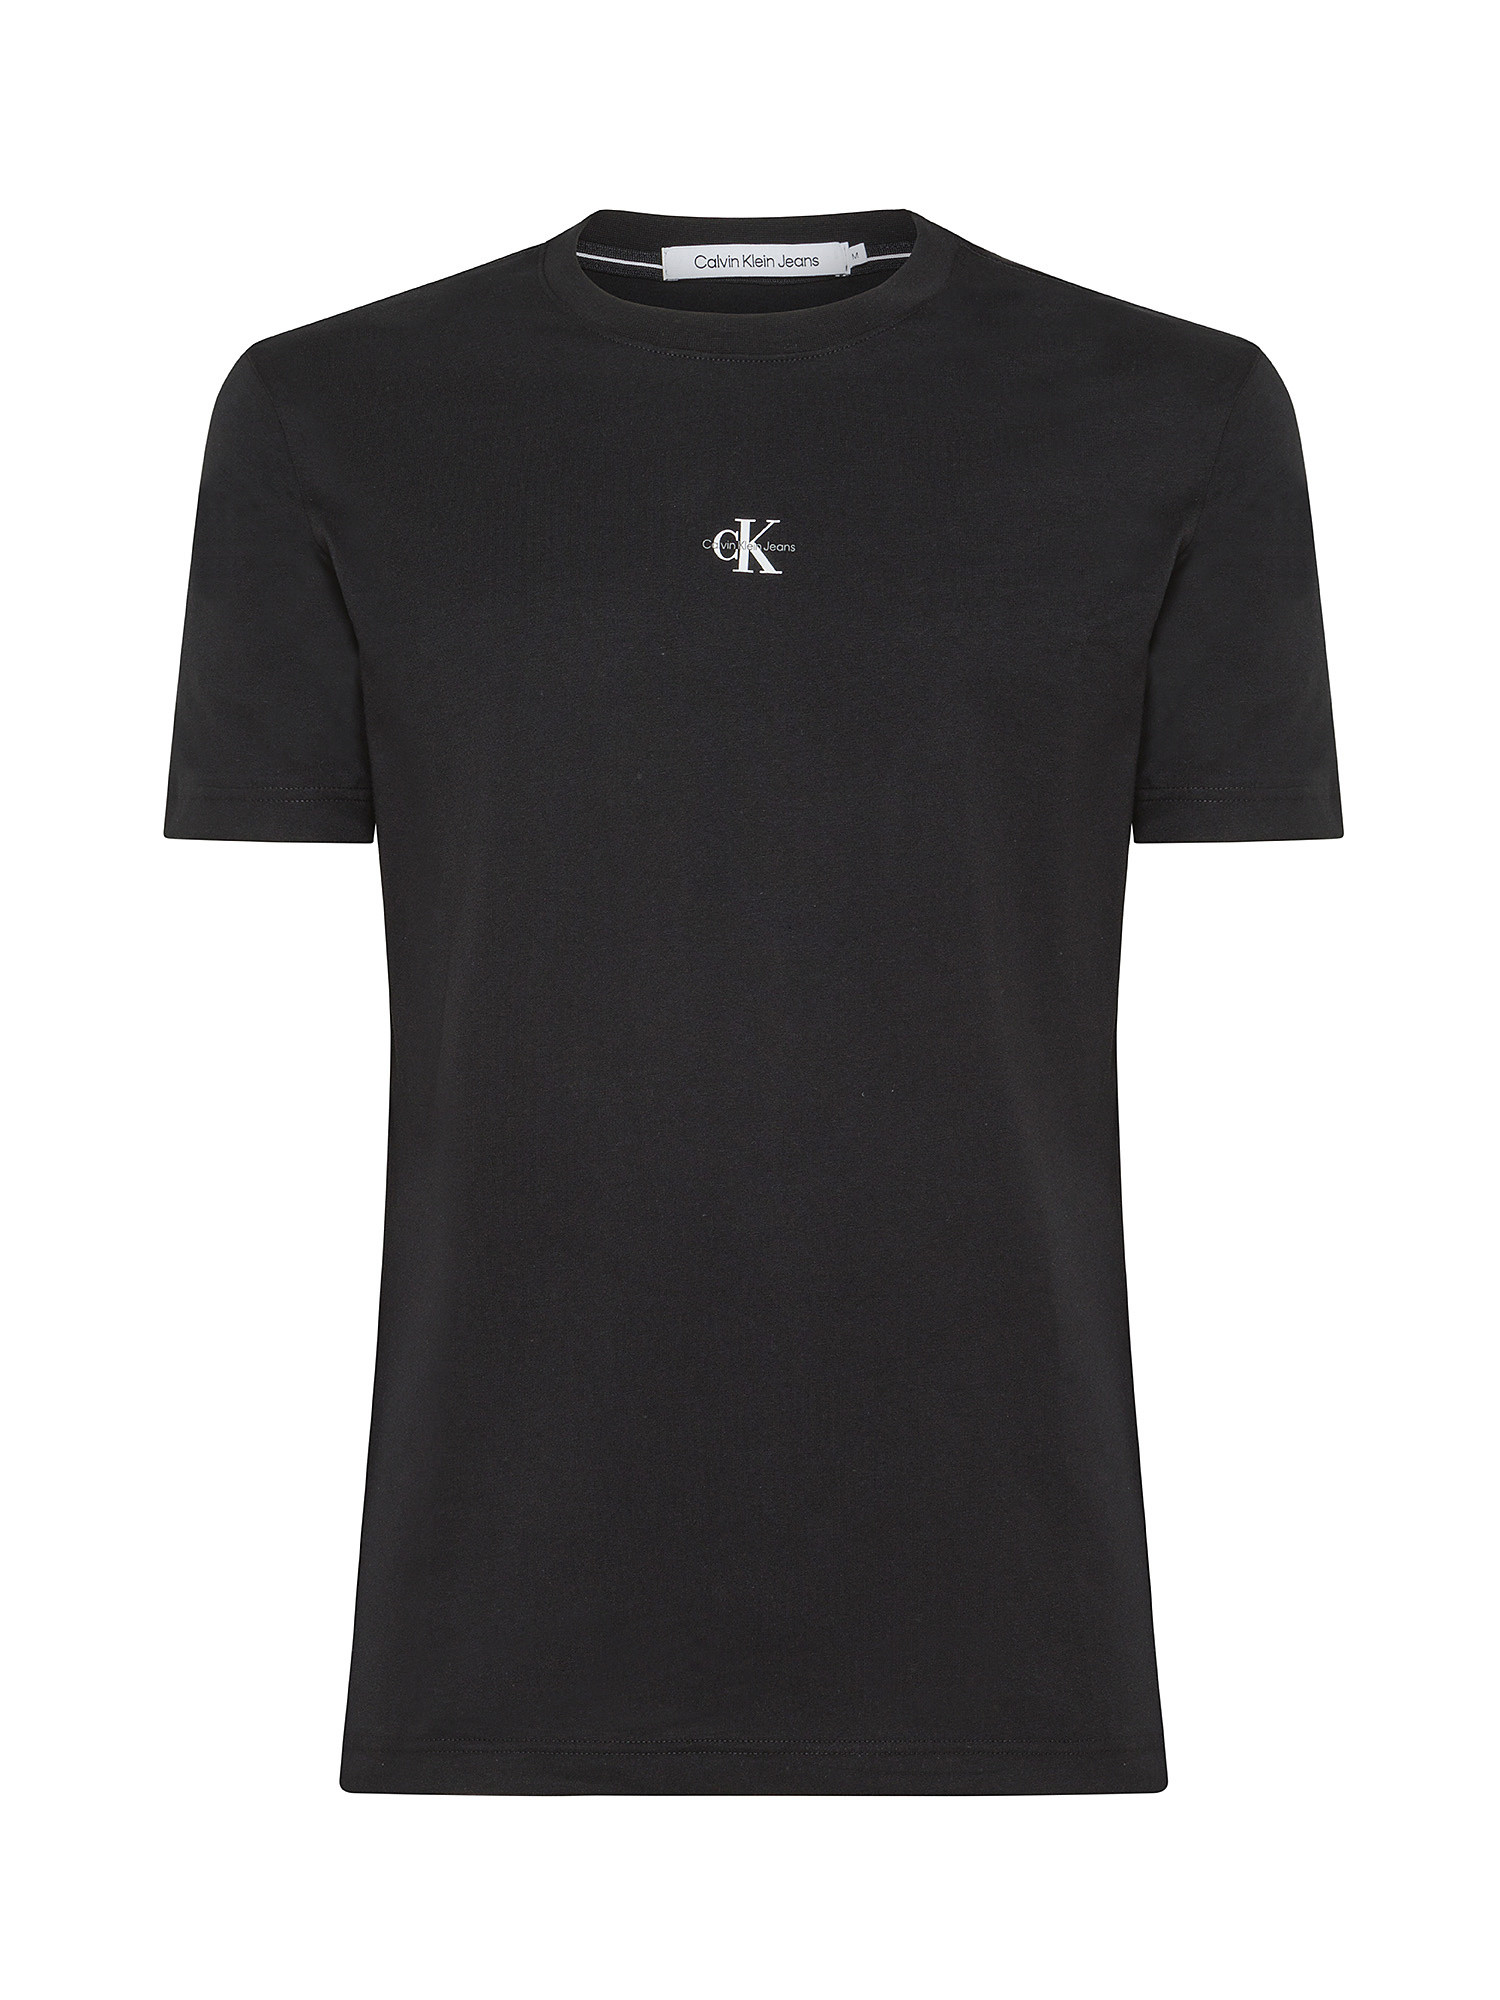 Calvin Klein Jeans - T-shirt in cotone biologico con logo, Nero, large image number 0